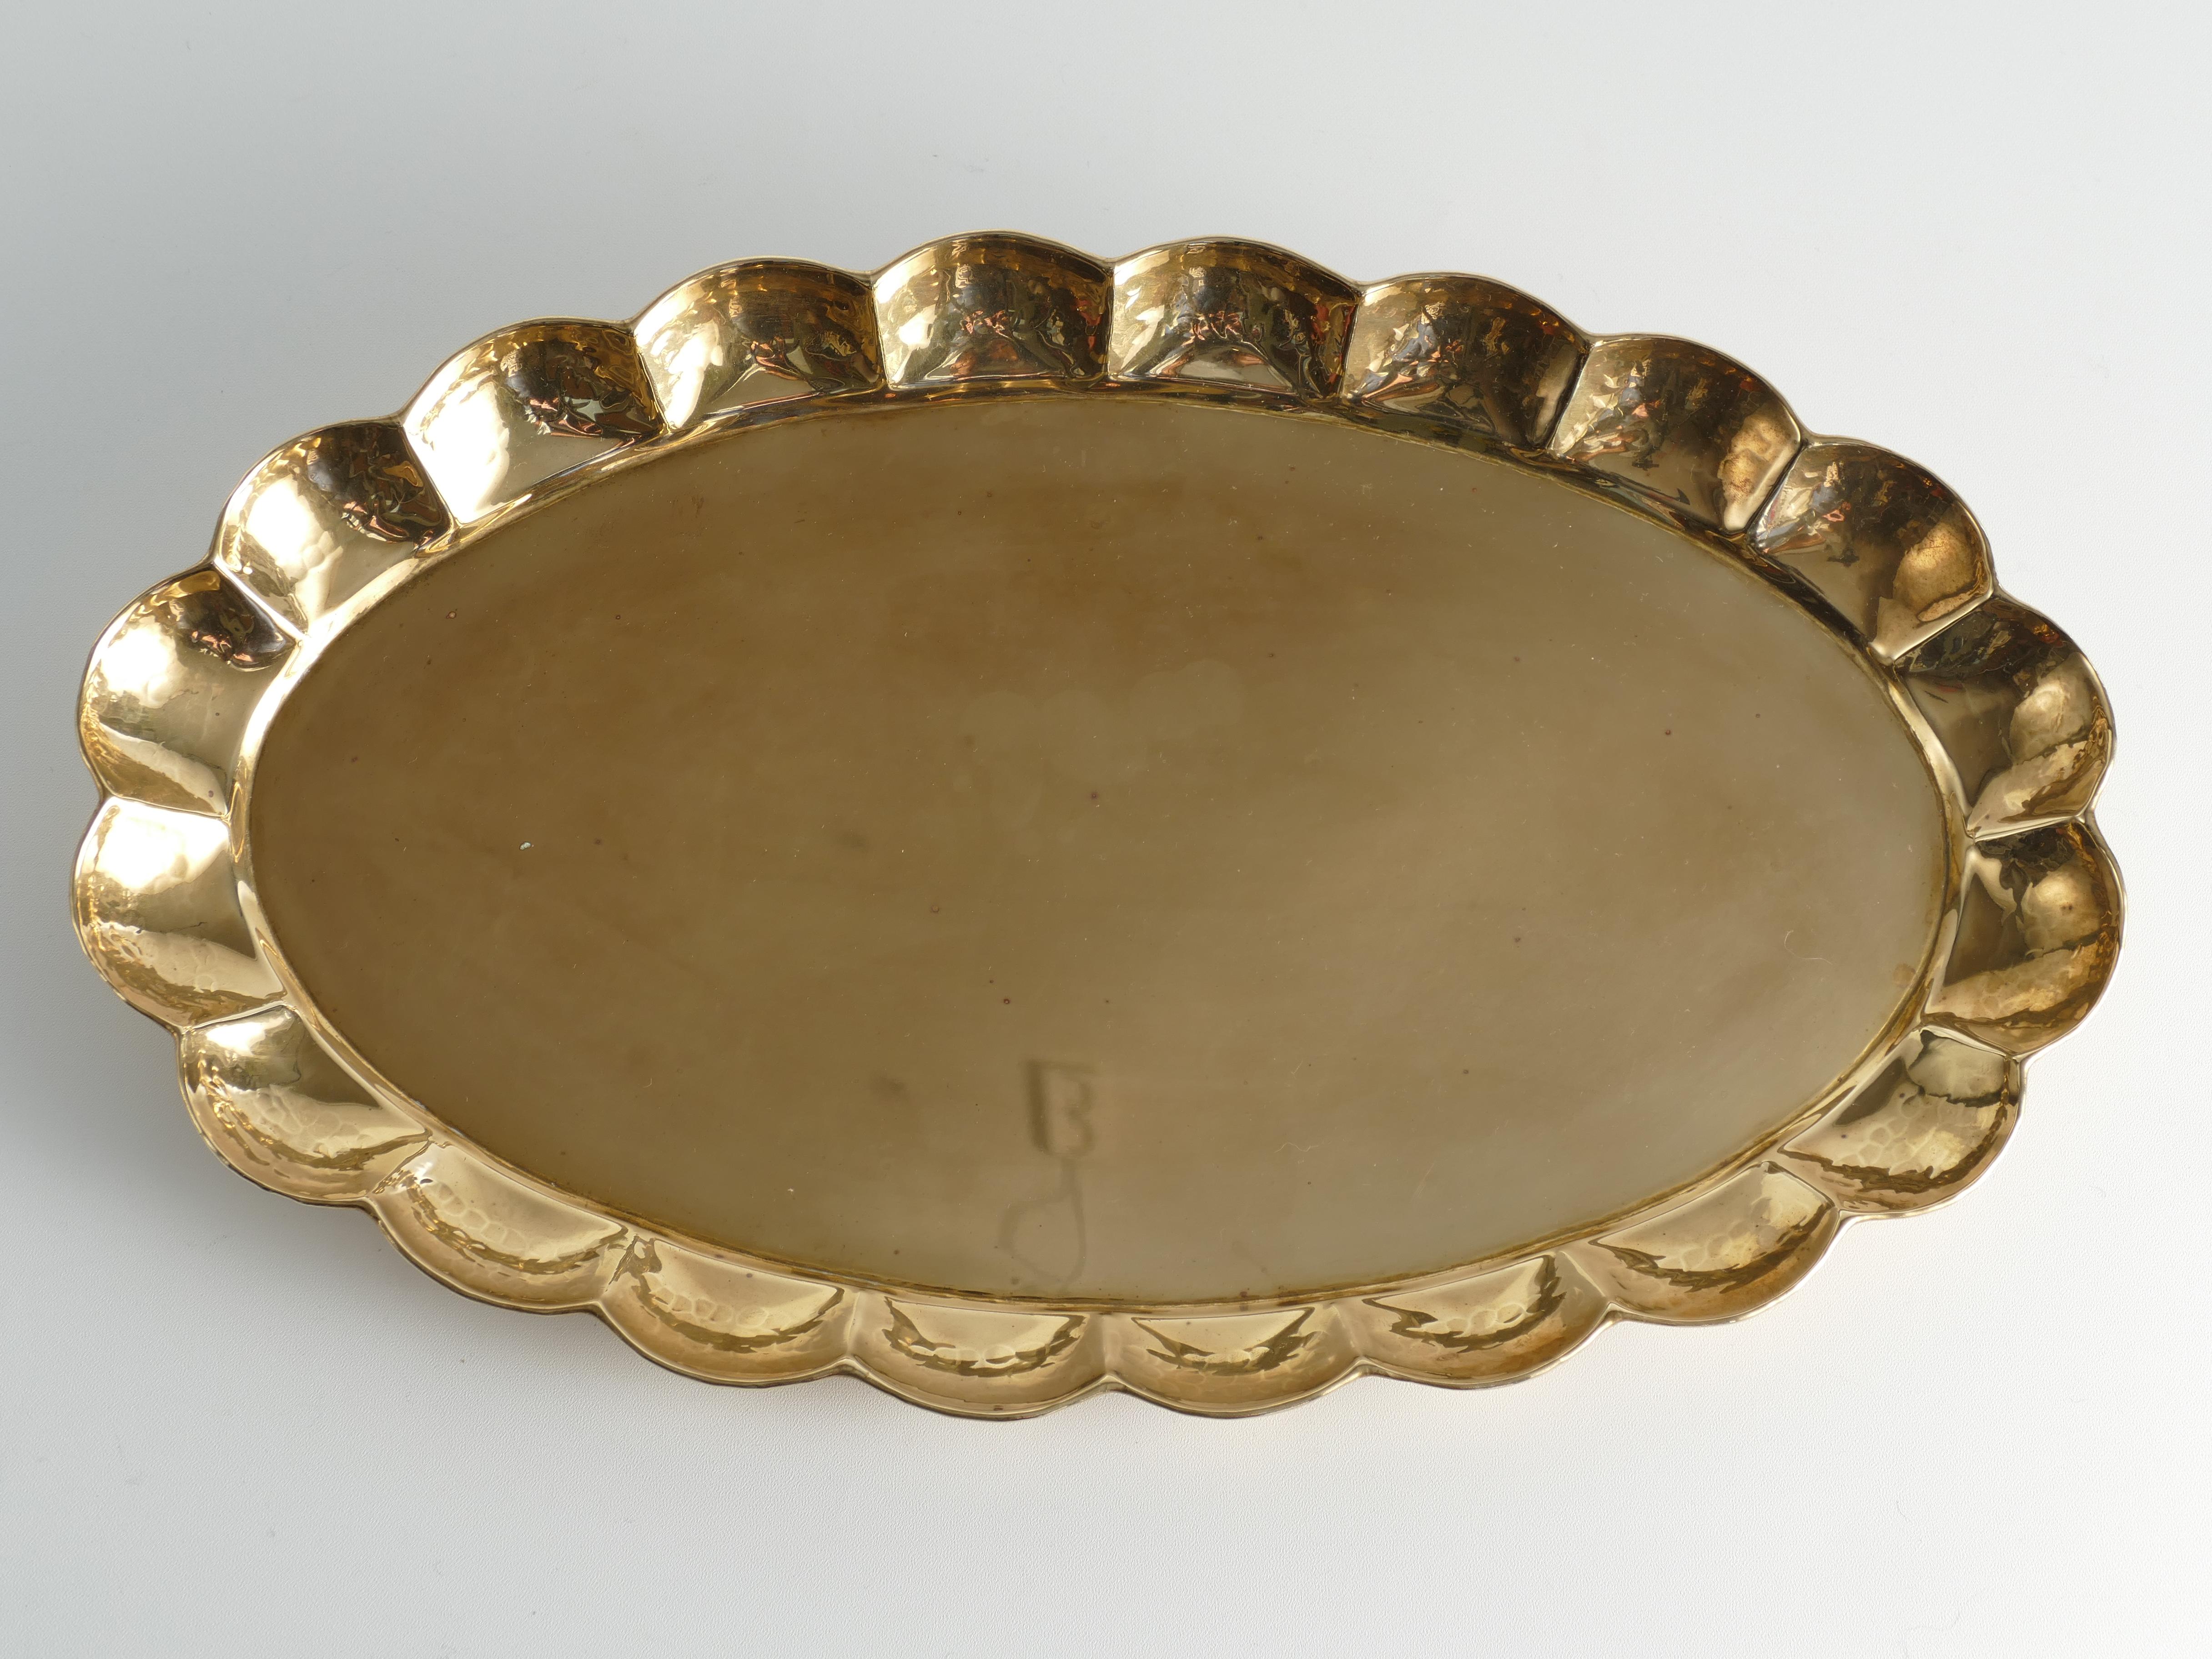 Masterfully crafted art deco / swedish grace oval brass tray designed by Arvid Johansson (1862-1923) and made at Karlstad Konstsmide, Sweden. The tray has an oval shape with a gracefully contoured, hand-hammered edge. Manual operation and stamped